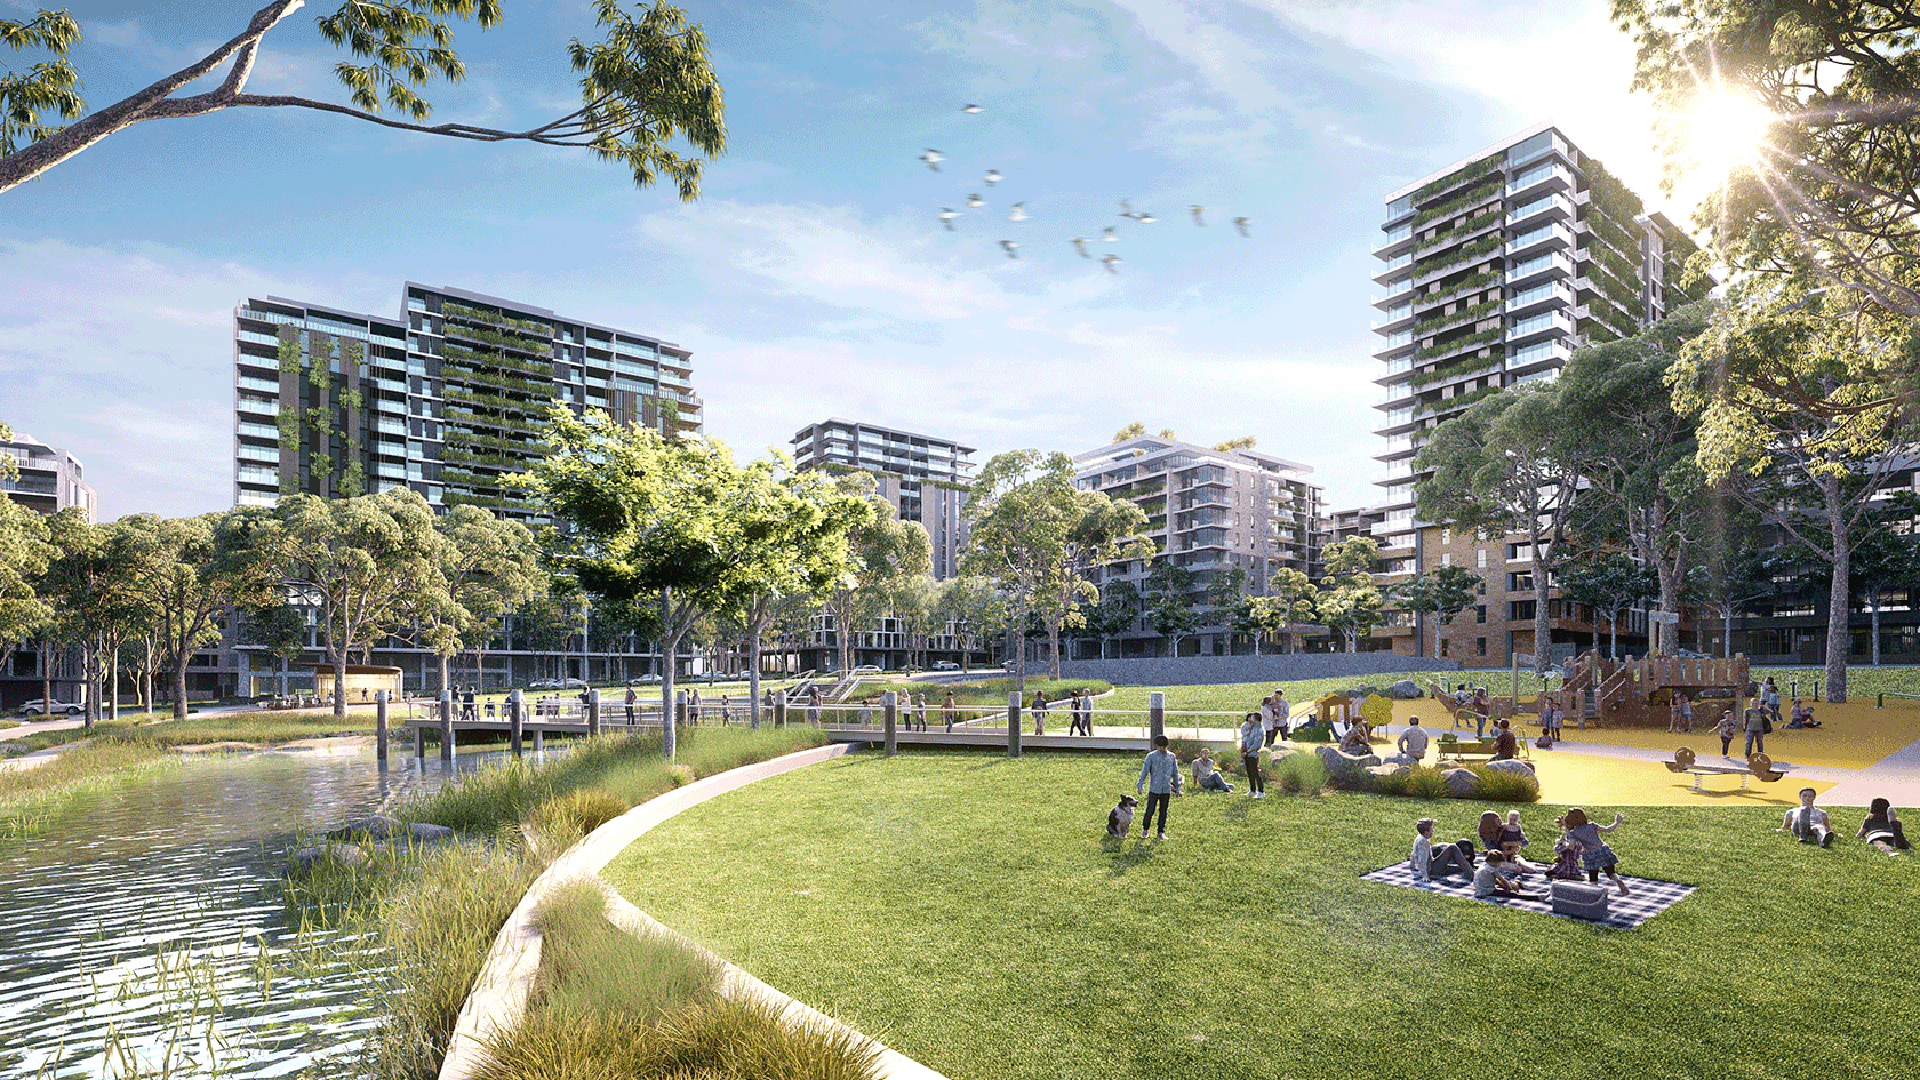 Parramatta well-placed to become design capital